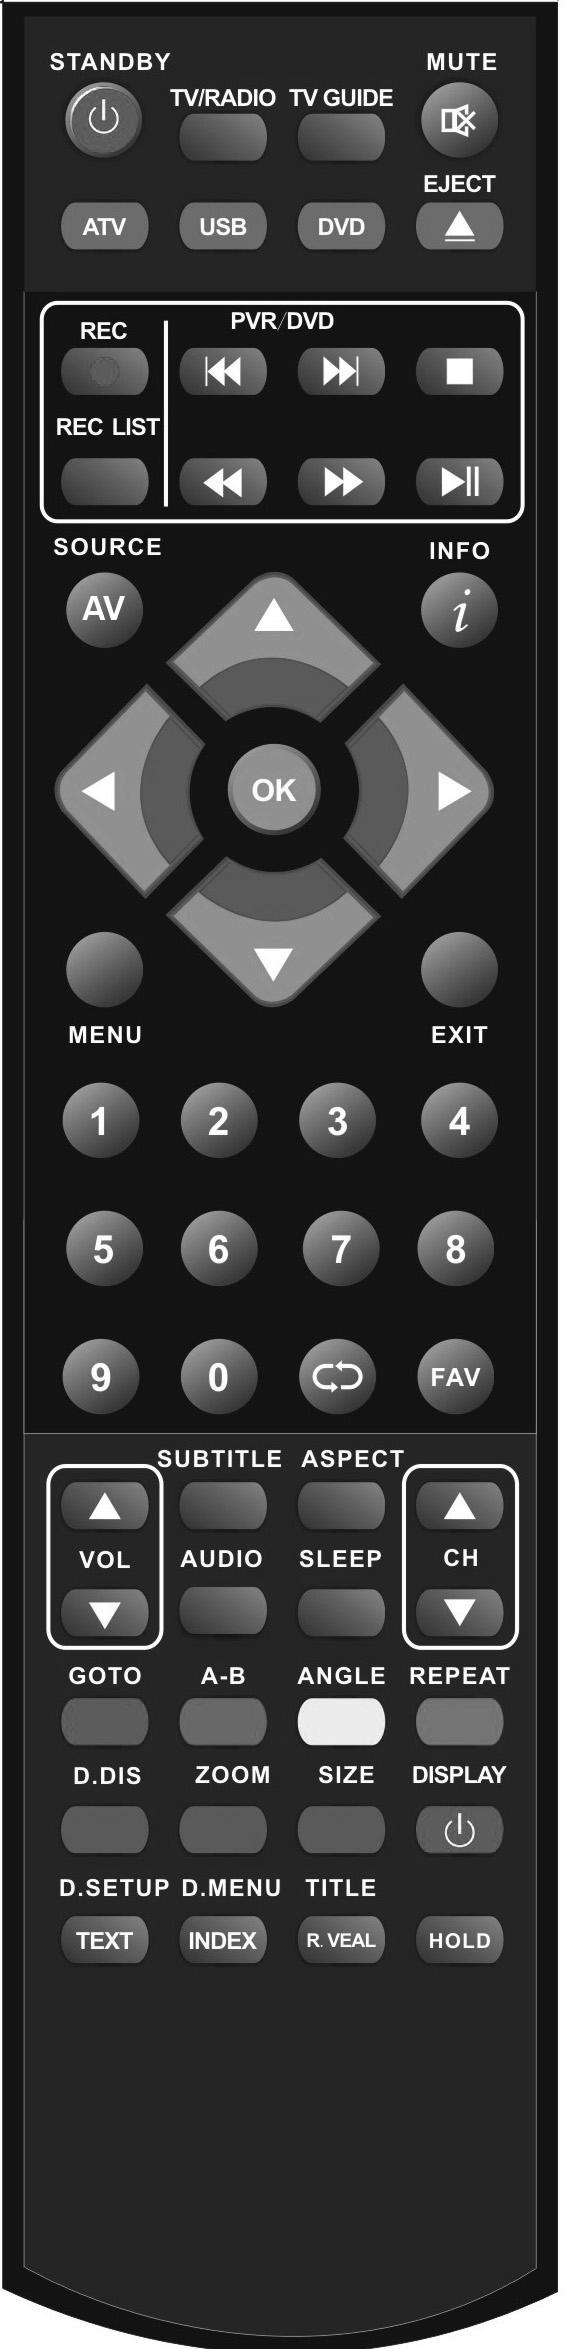 Remote Control REMOTE CONTROL 1 1 2 3 4 5 STANDBY - Switch on TV when in standby or vice versa MUTE - Mute the sound or vice versa TV/RADIO - Switch to Digital and switch between TV and radio in